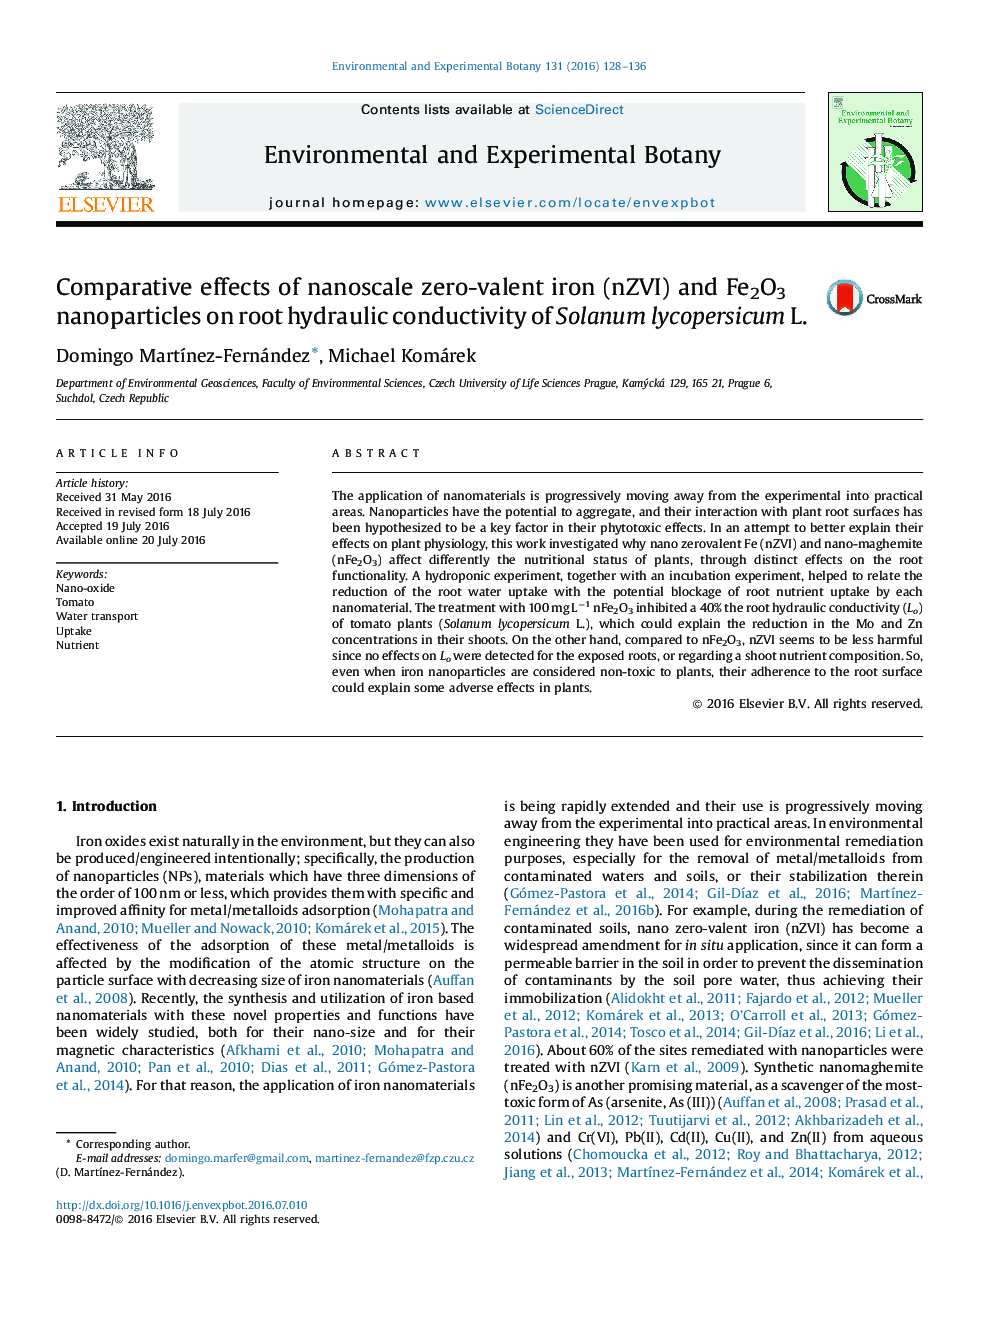 Comparative effects of nanoscale zero-valent iron (nZVI) and Fe2O3 nanoparticles on root hydraulic conductivity of Solanum lycopersicum L.